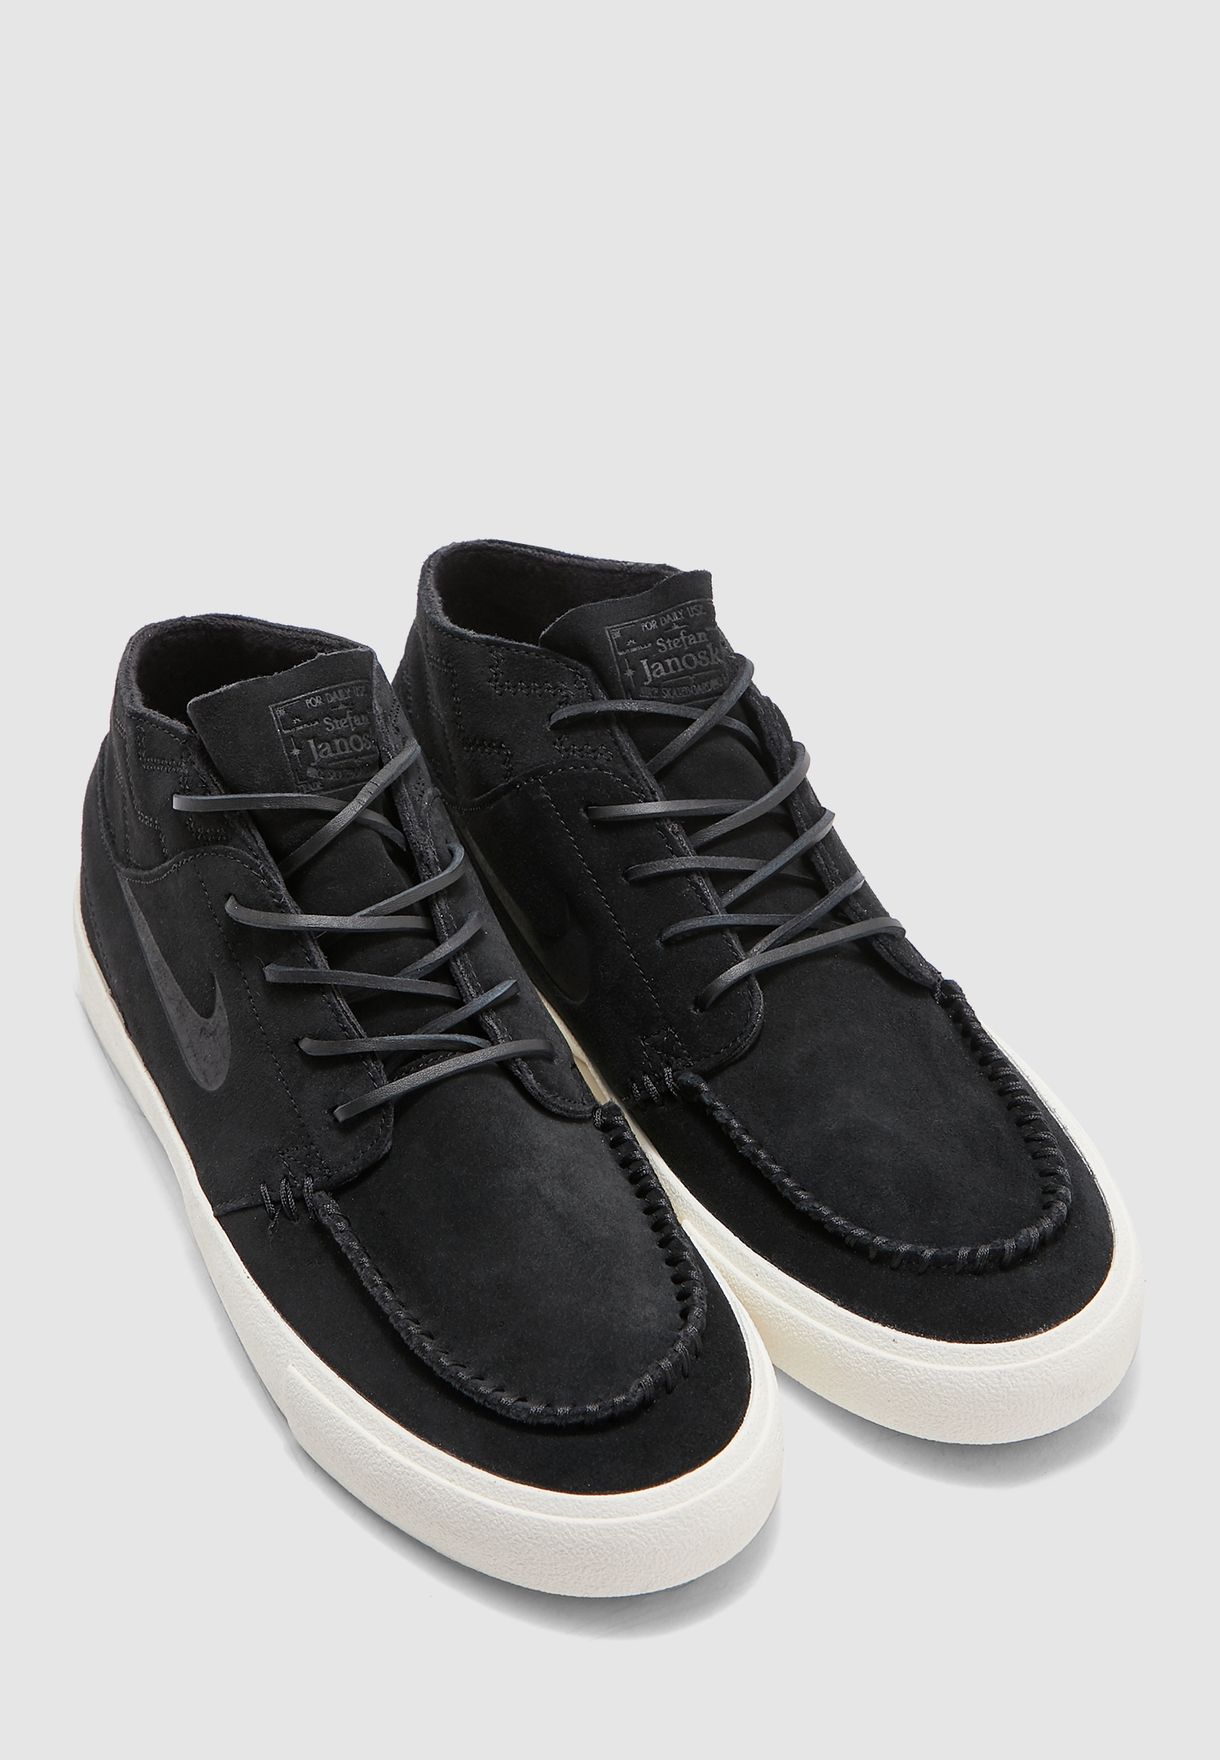 zoom janoski mid crafted